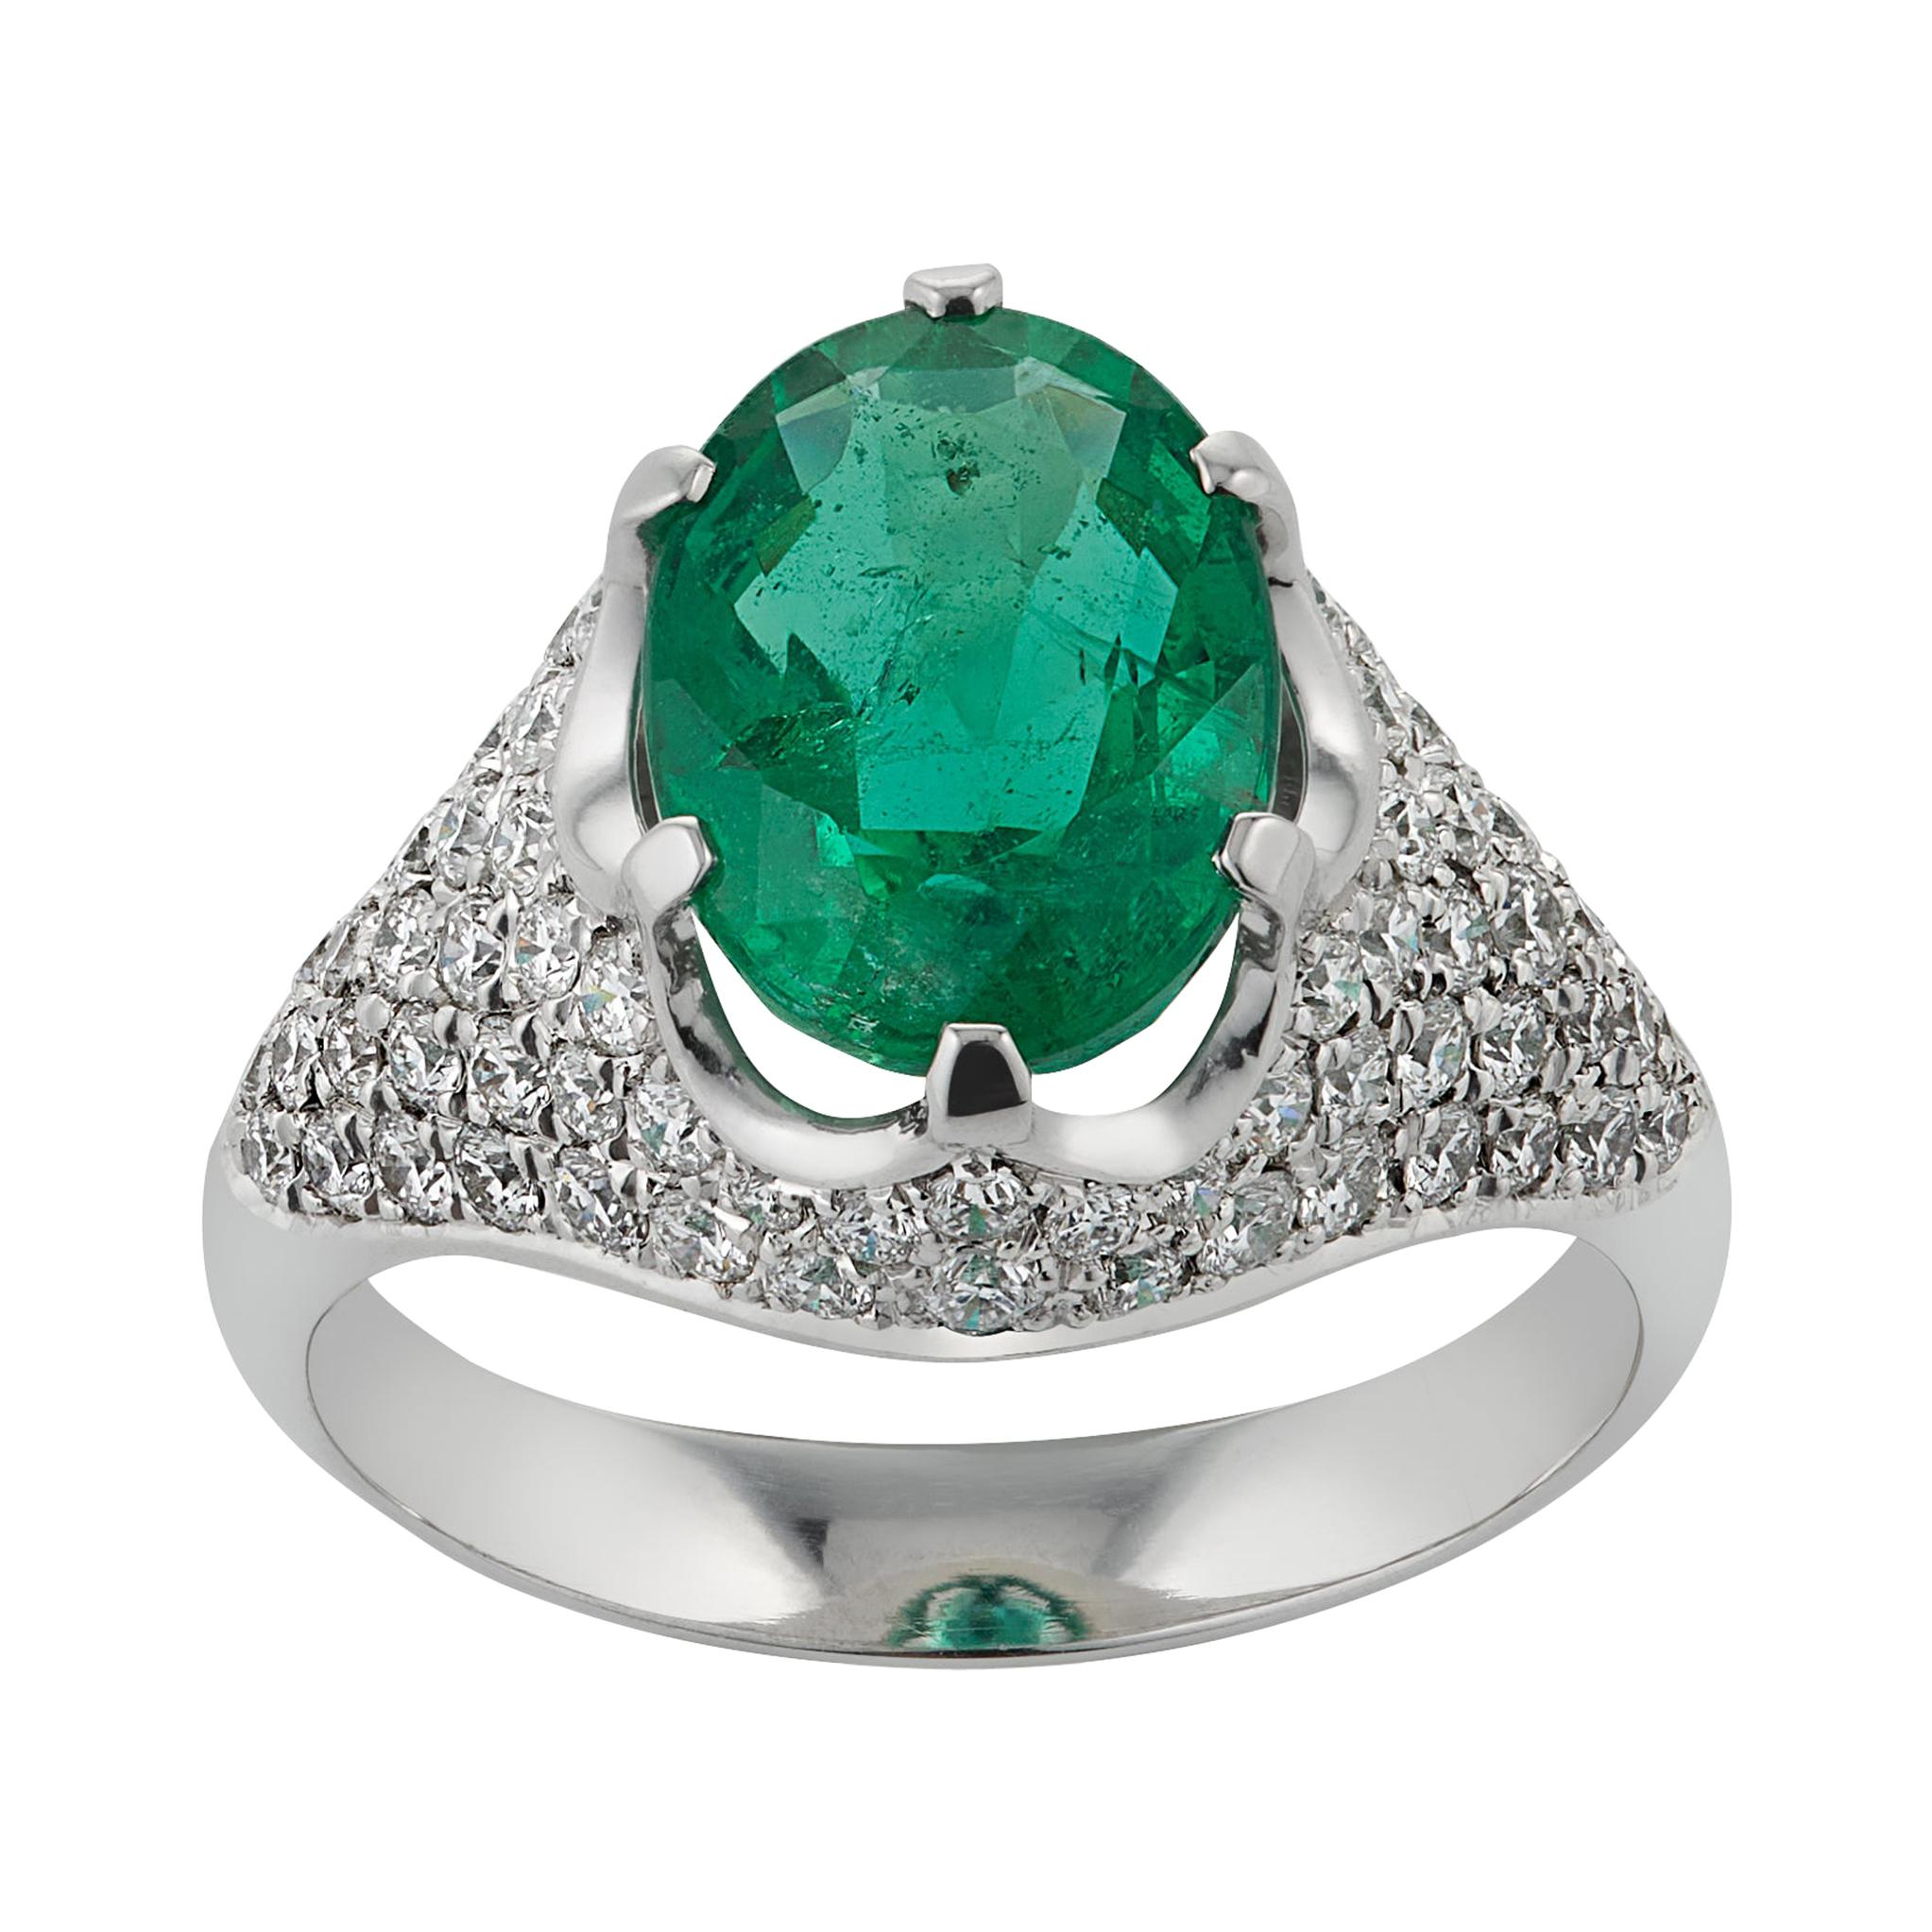 E Wolfe & Co Handmade 18ct White Gold Emerald and Diamond Cocktail Ring For Sale